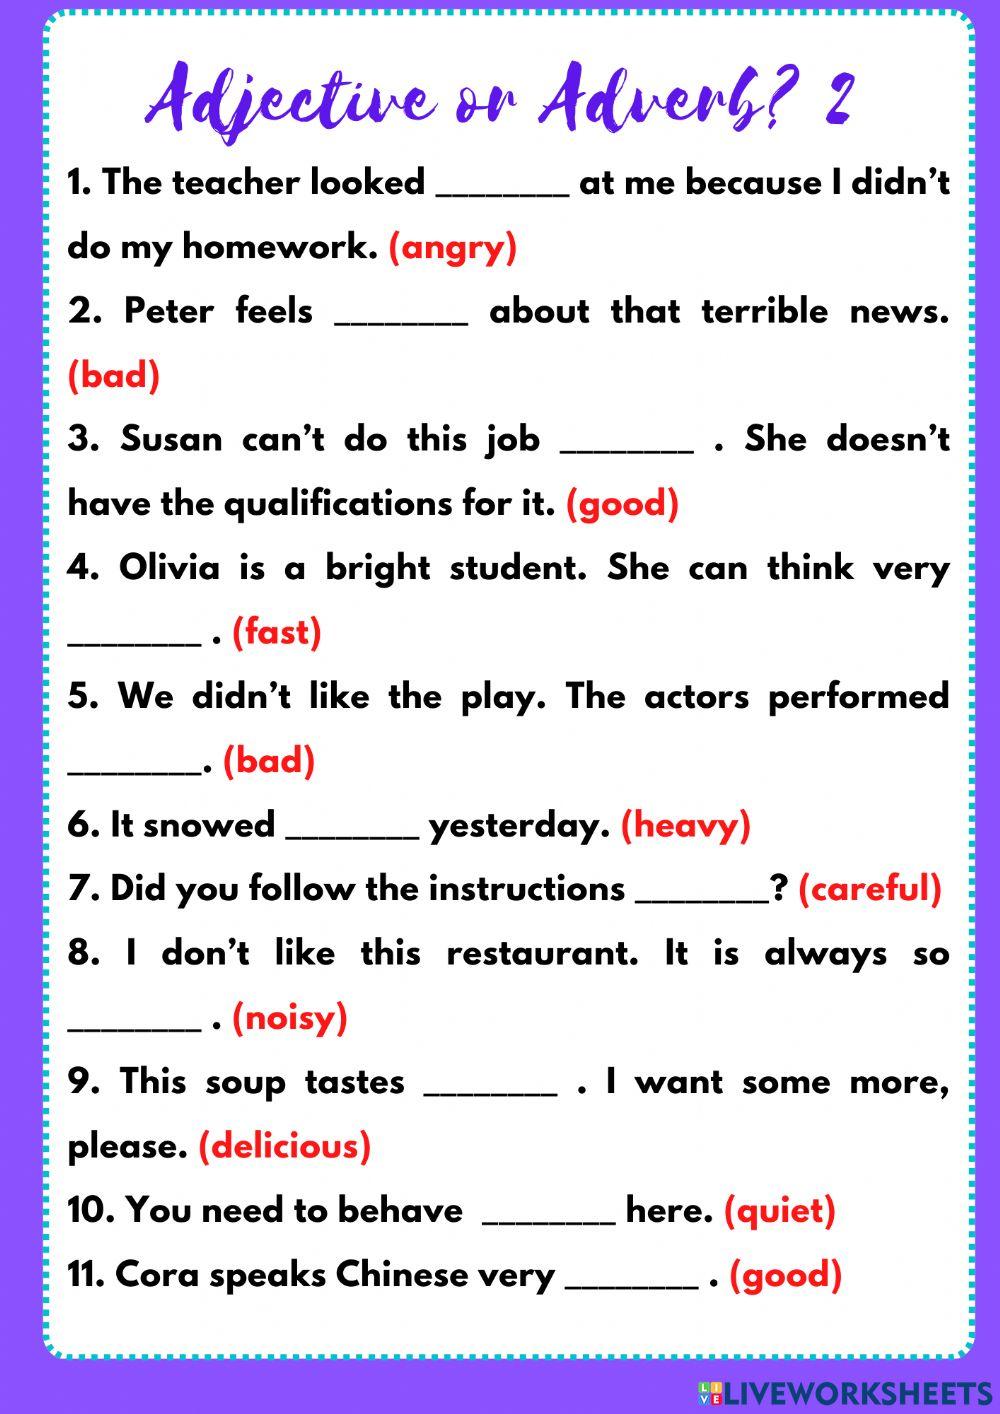 Adjectives and adverbs 2